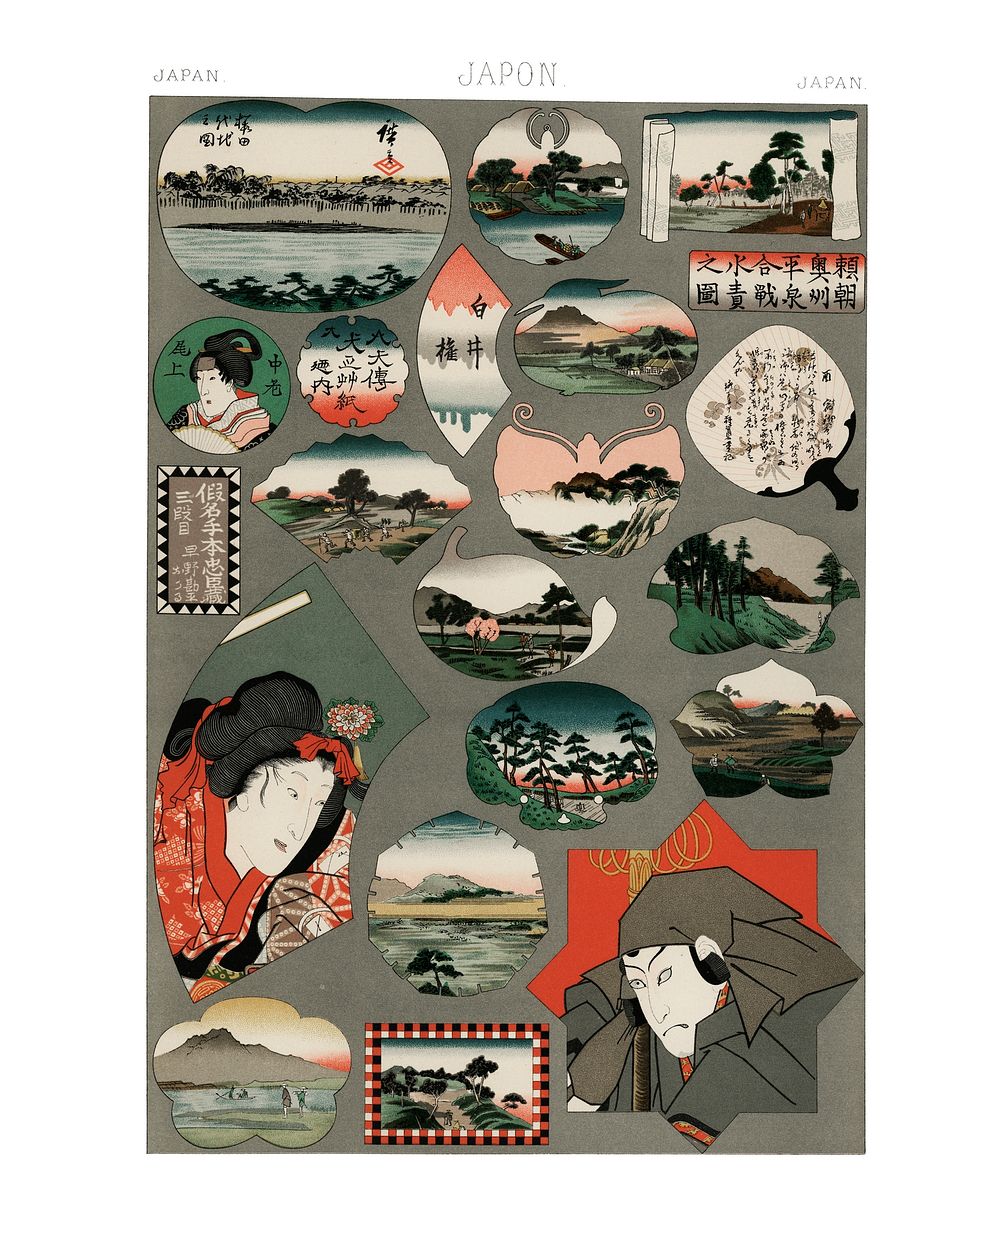 Traditional Japanese man and woman wall art print and poster.